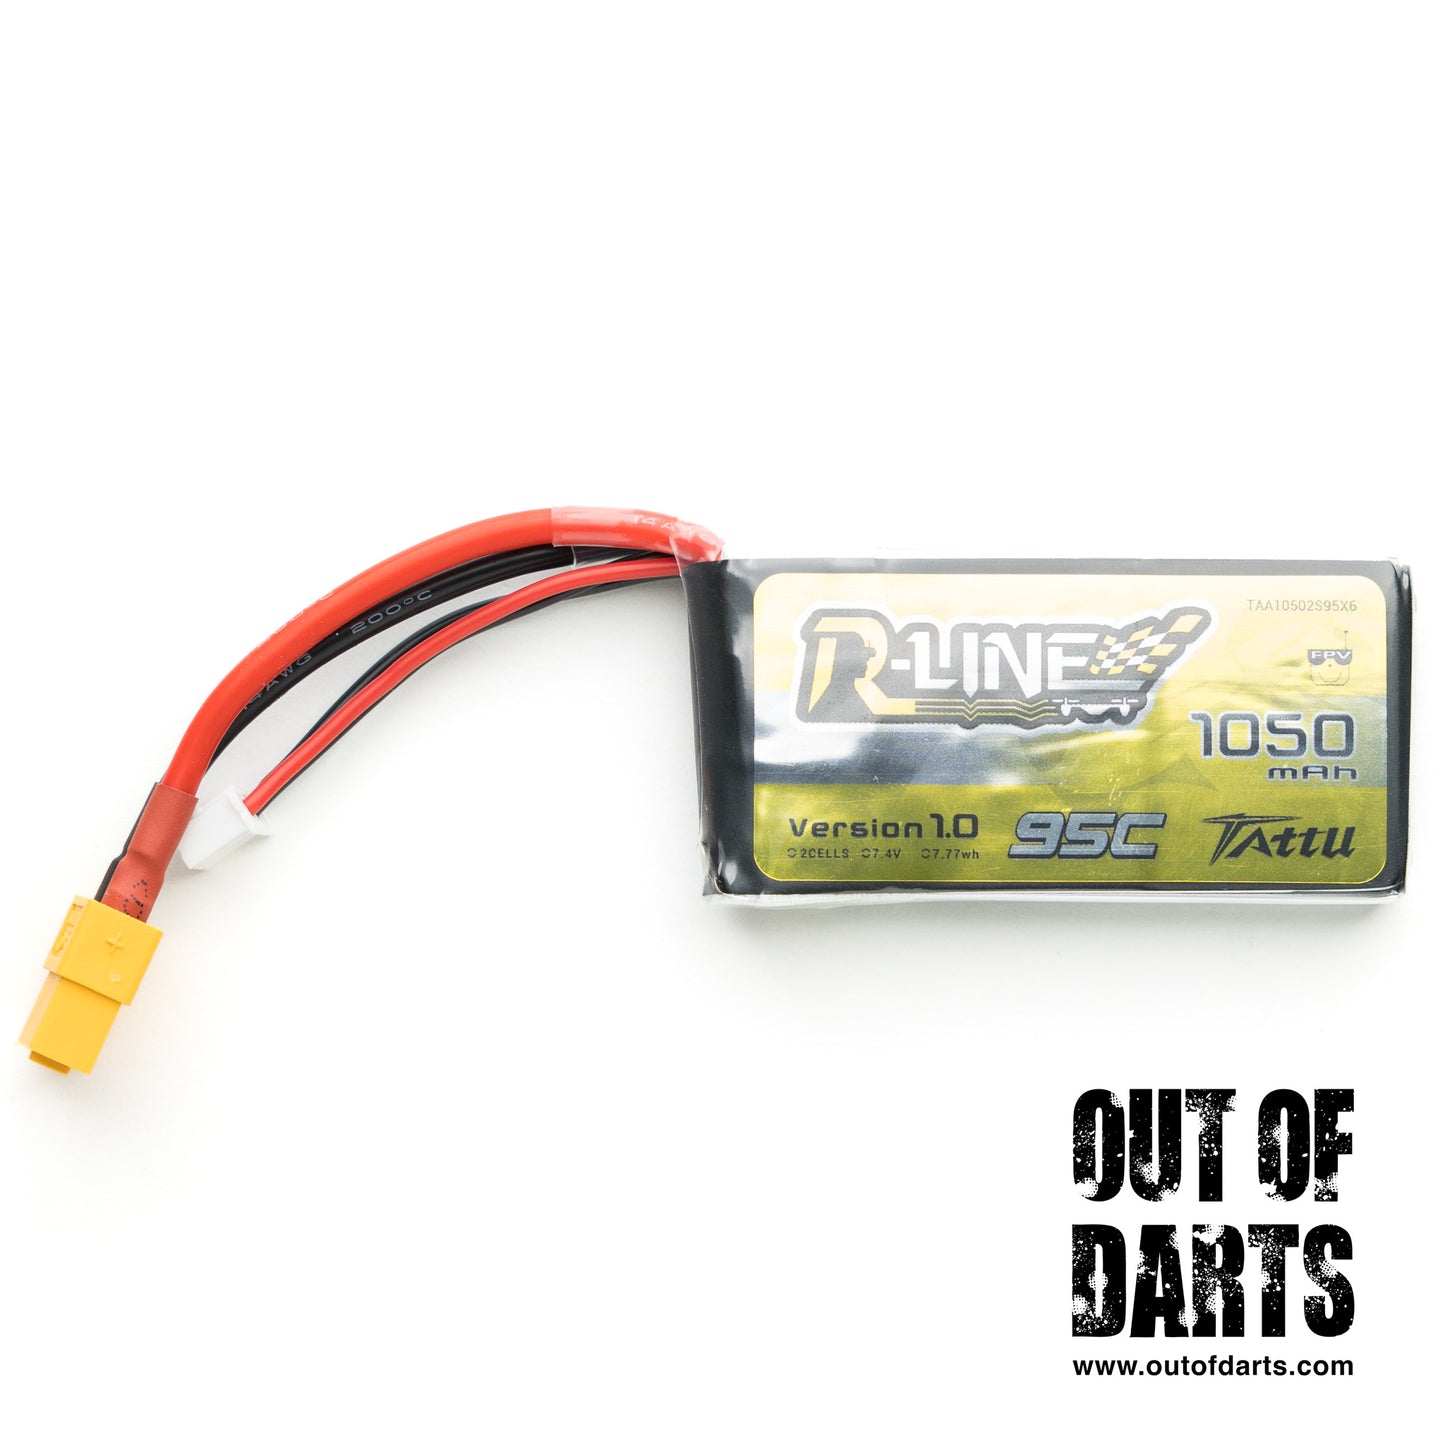 LiPo 2S Battery 101: All About LiPo 2S Batteries